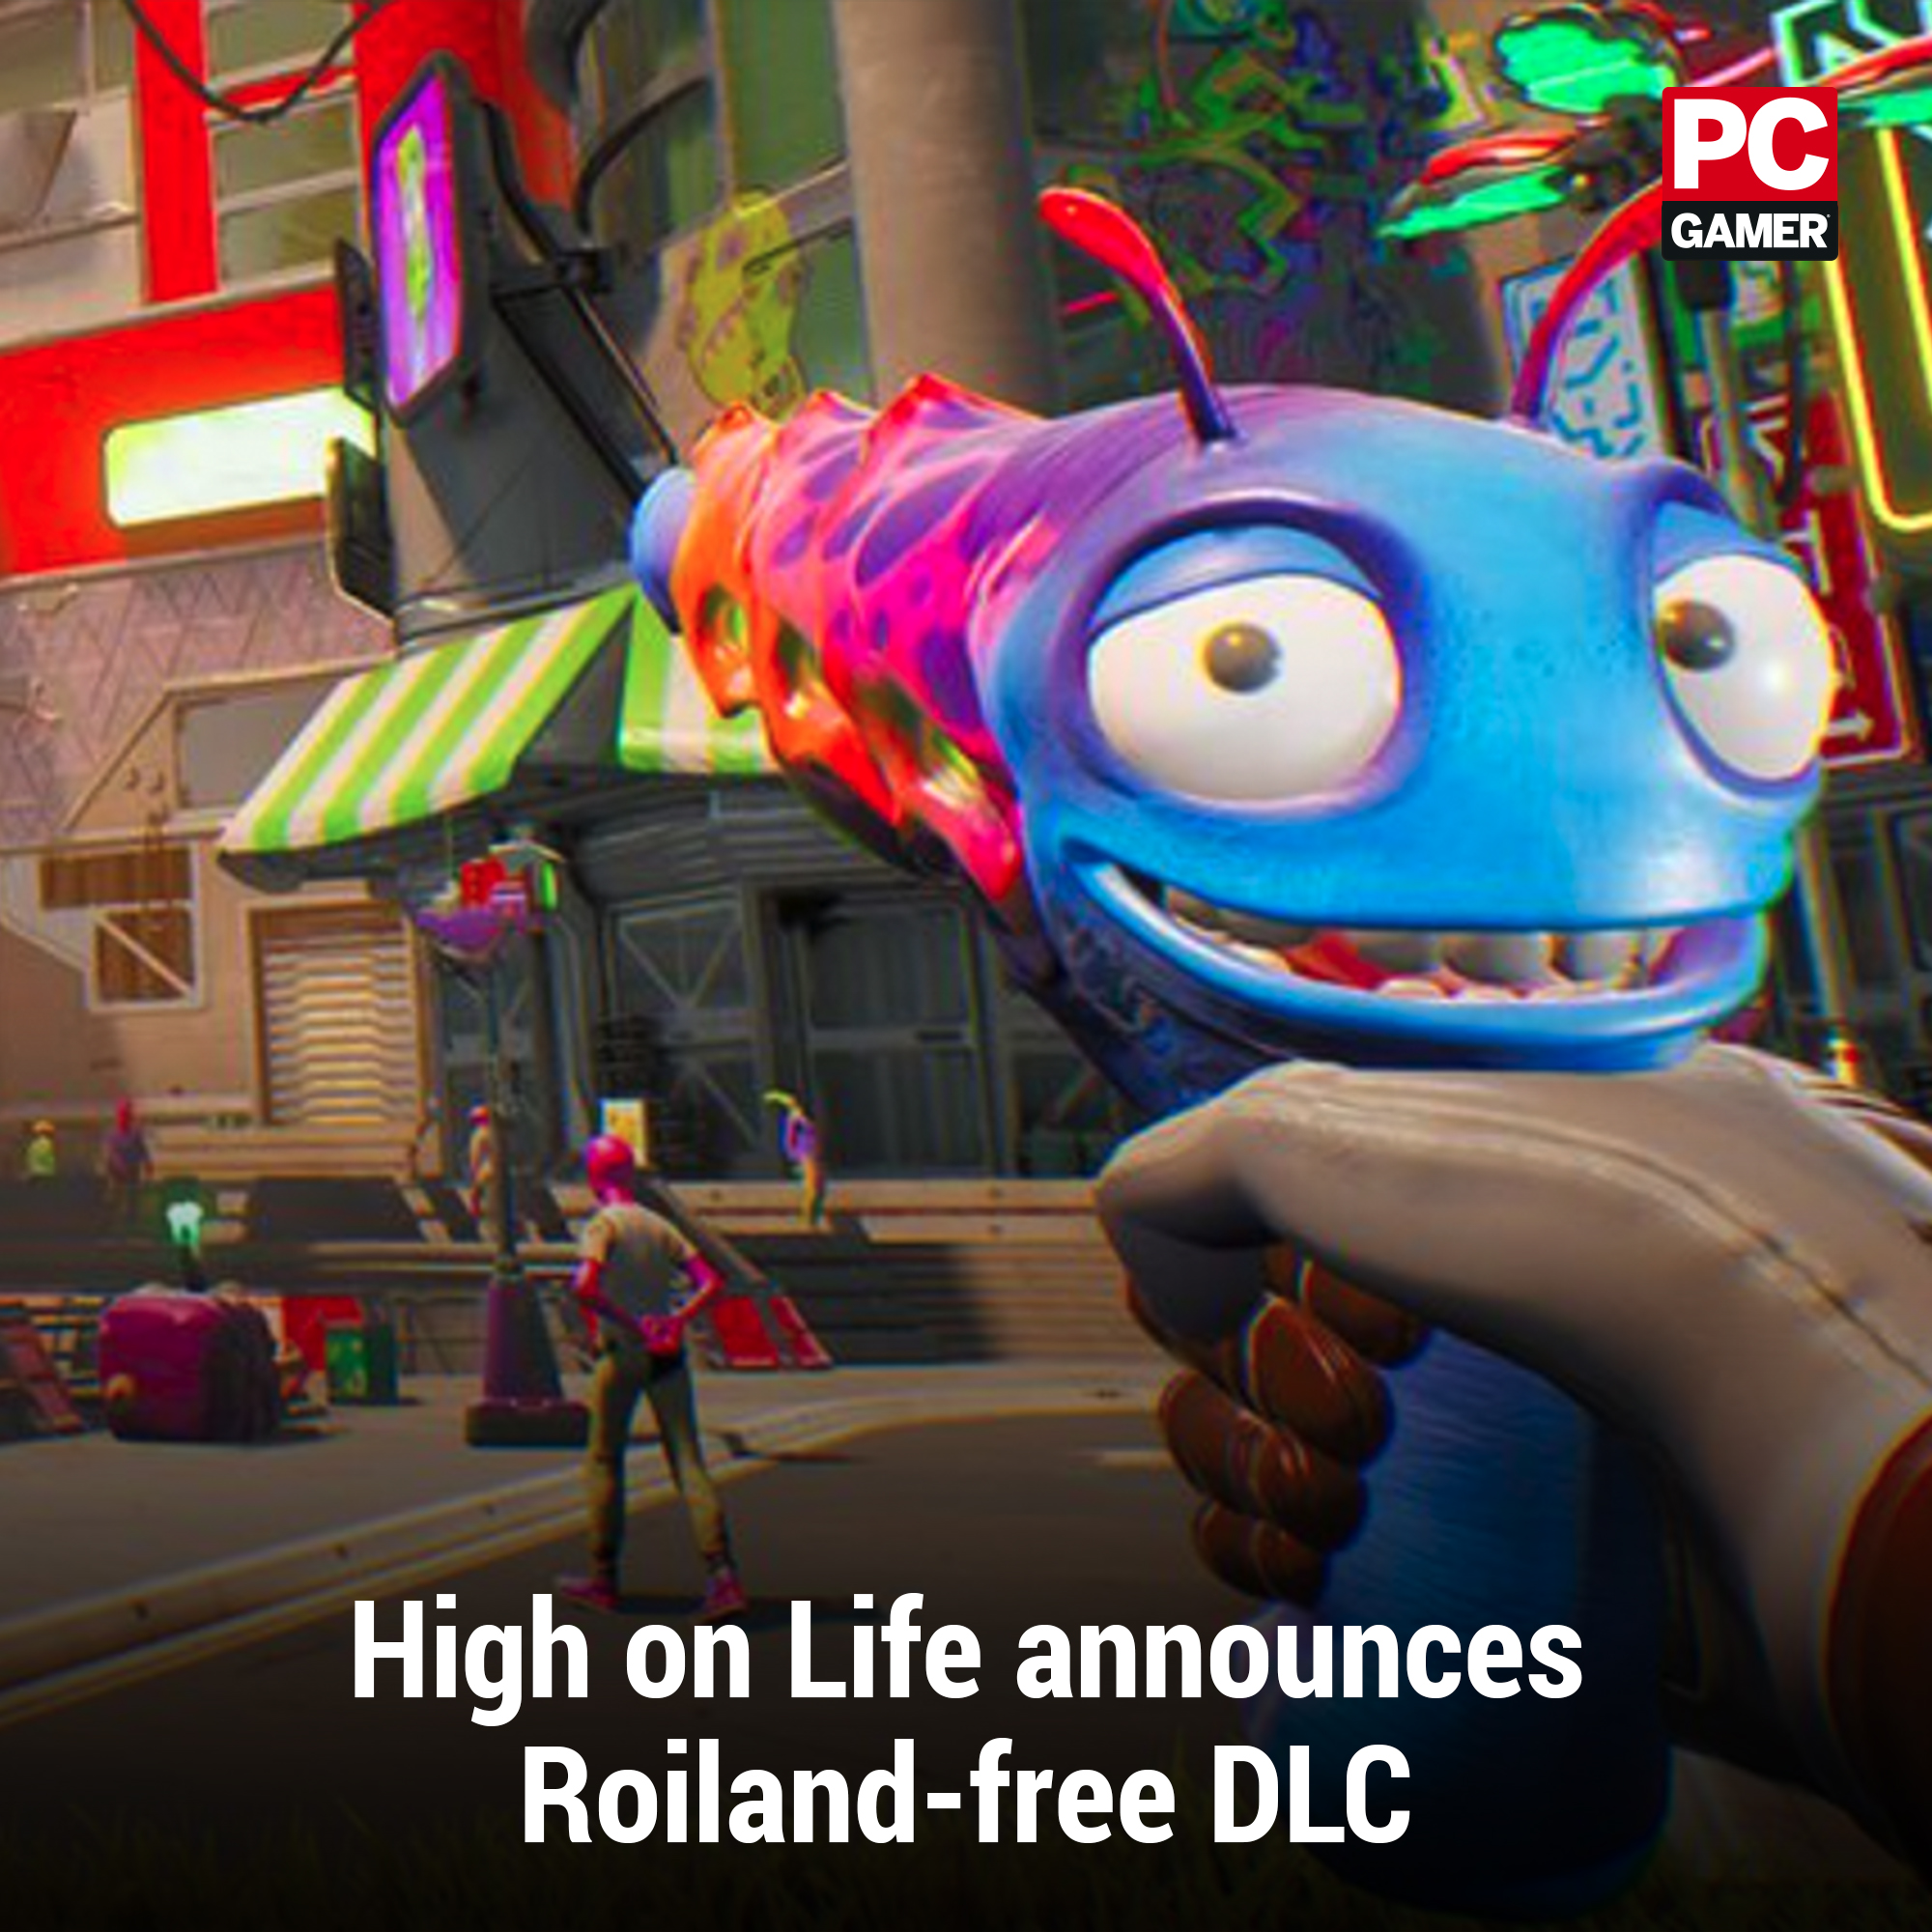 Is there going to be high on life DLC?